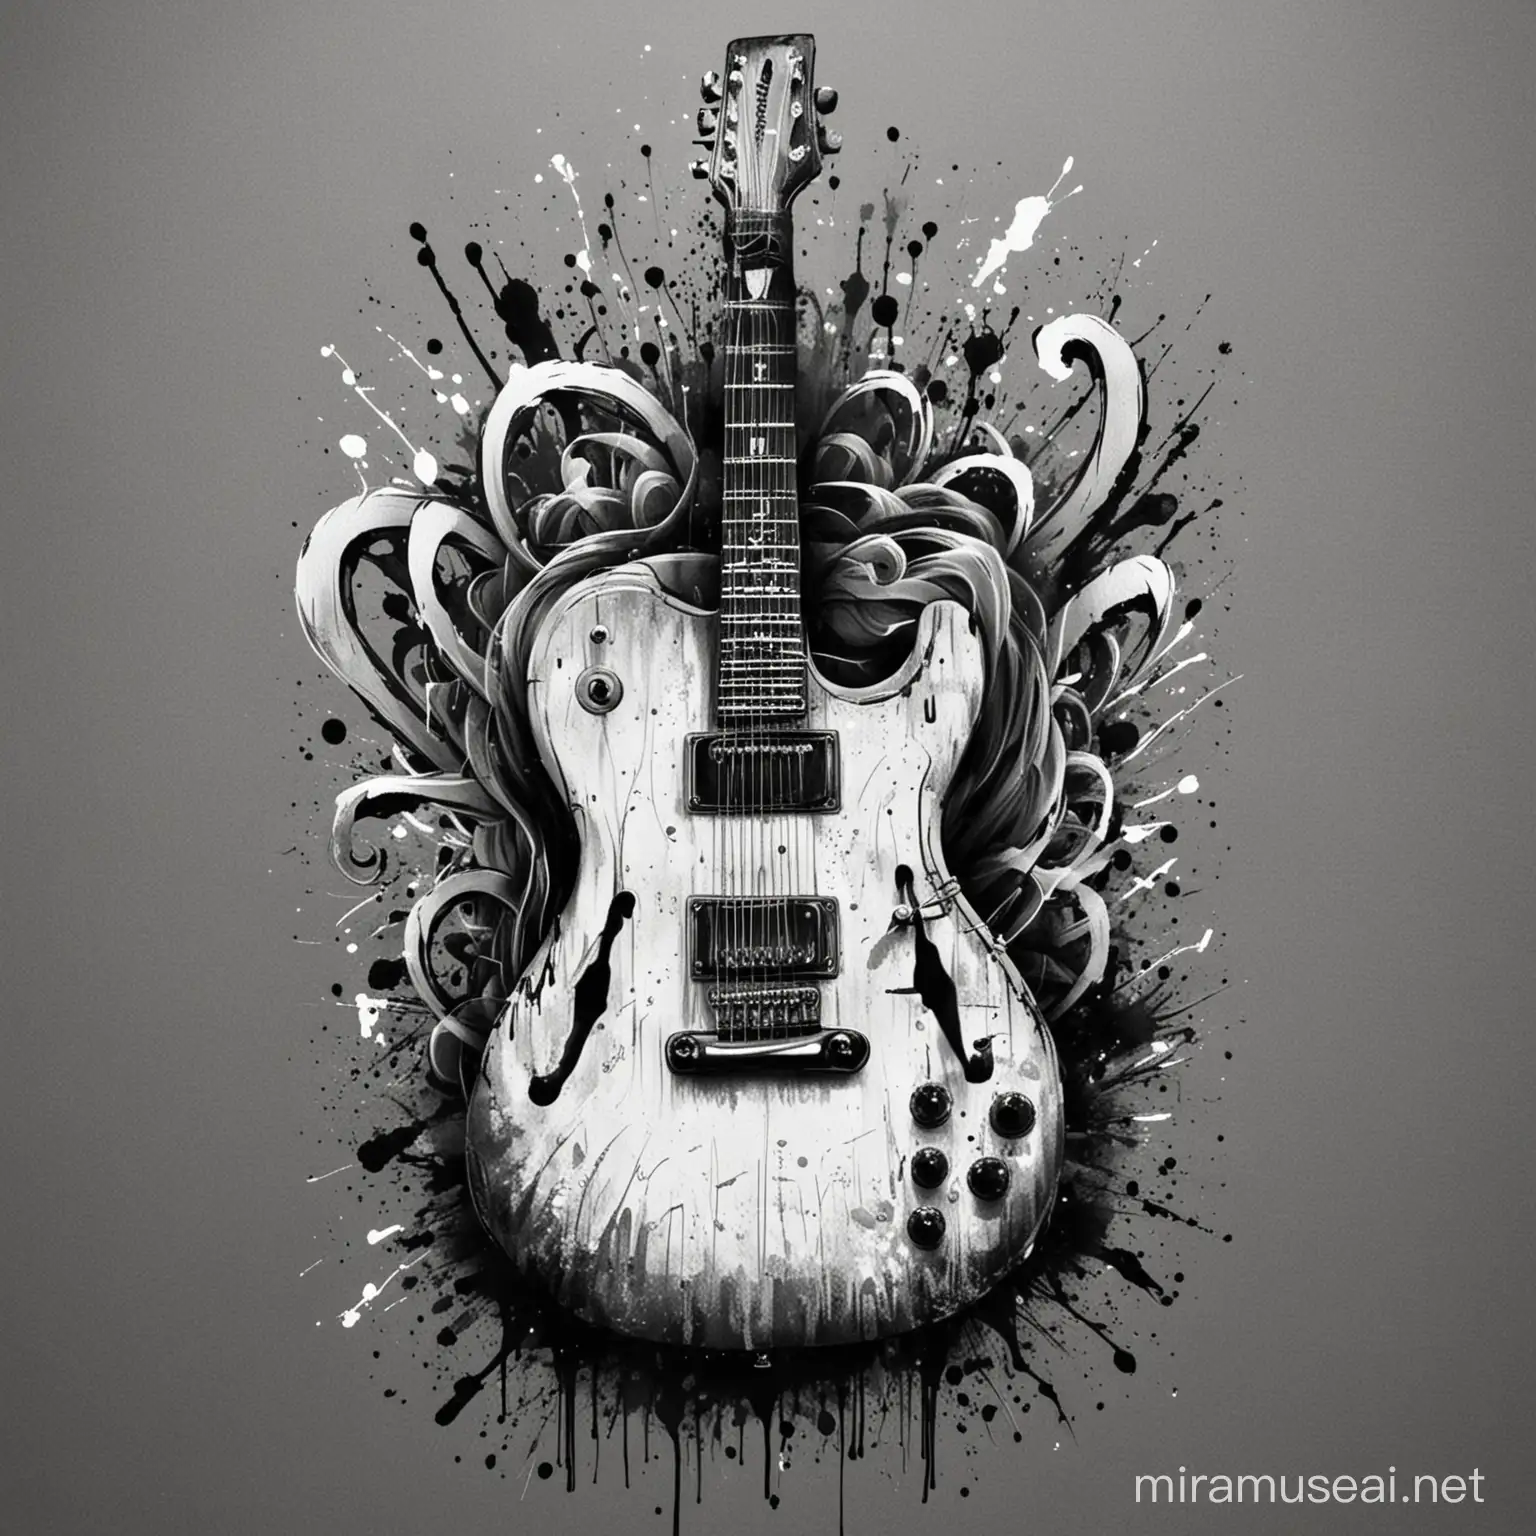 give me a simple t shirt design based on a simple guitar painted in a graffitti. Use only black and white colours 